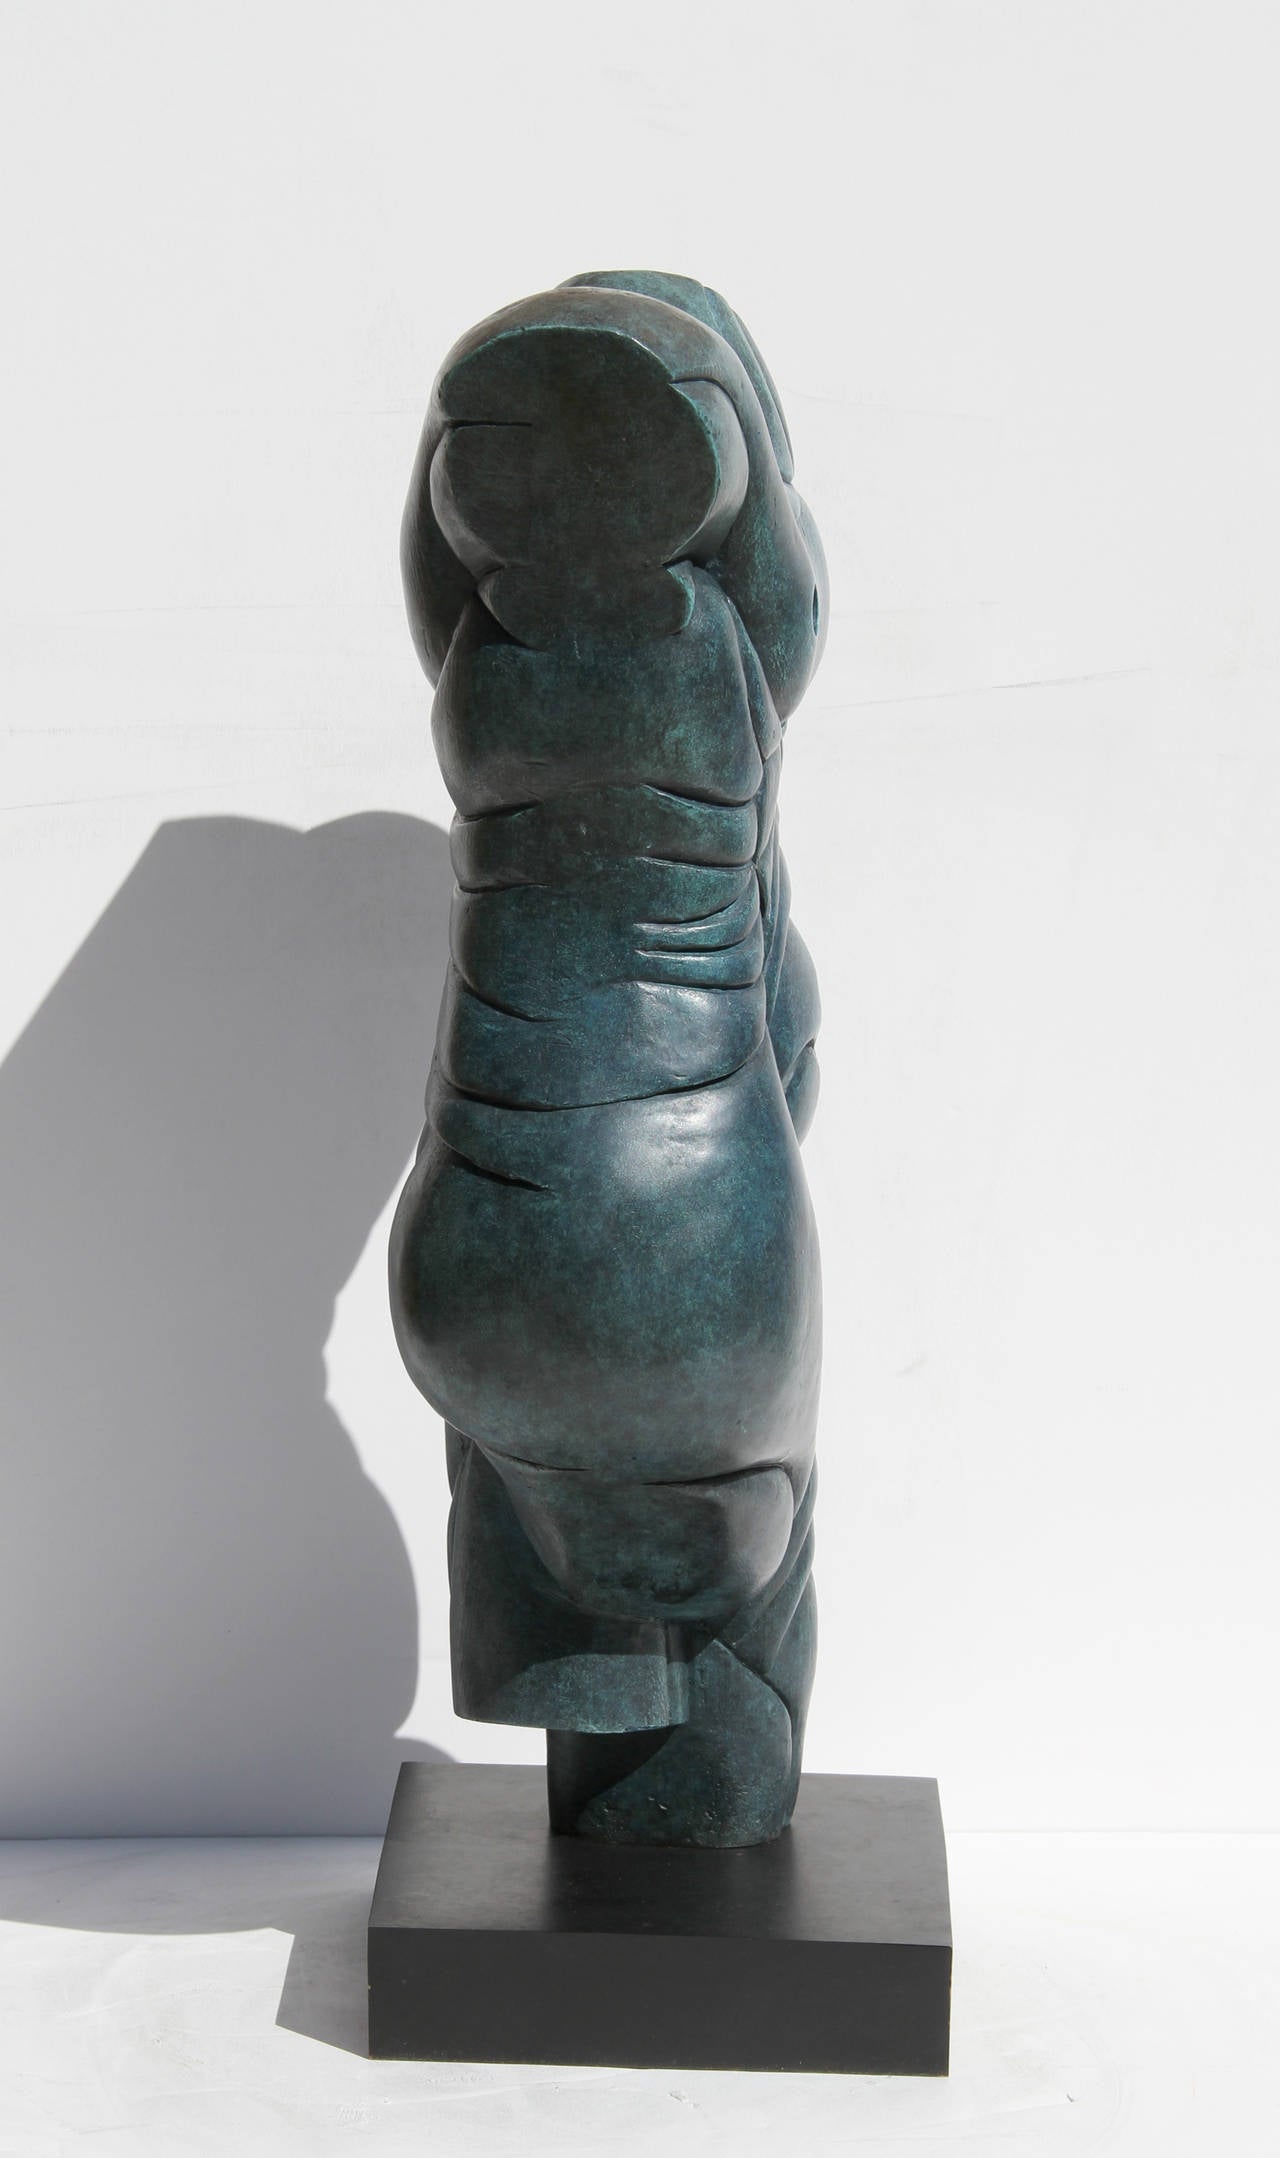 Artist: Anthony Quinn, American (1915 - 2001)
Title: Zeus
Year: 1992
Medium: Bronze Sculpture with Patina, signature, date and number inscribed
Edition: 8/8
Size: 22 in. x 9 in. x 5 in. (55.88 cm x 22.86 cm x 12.7 cm)
Base: 2 inches tall